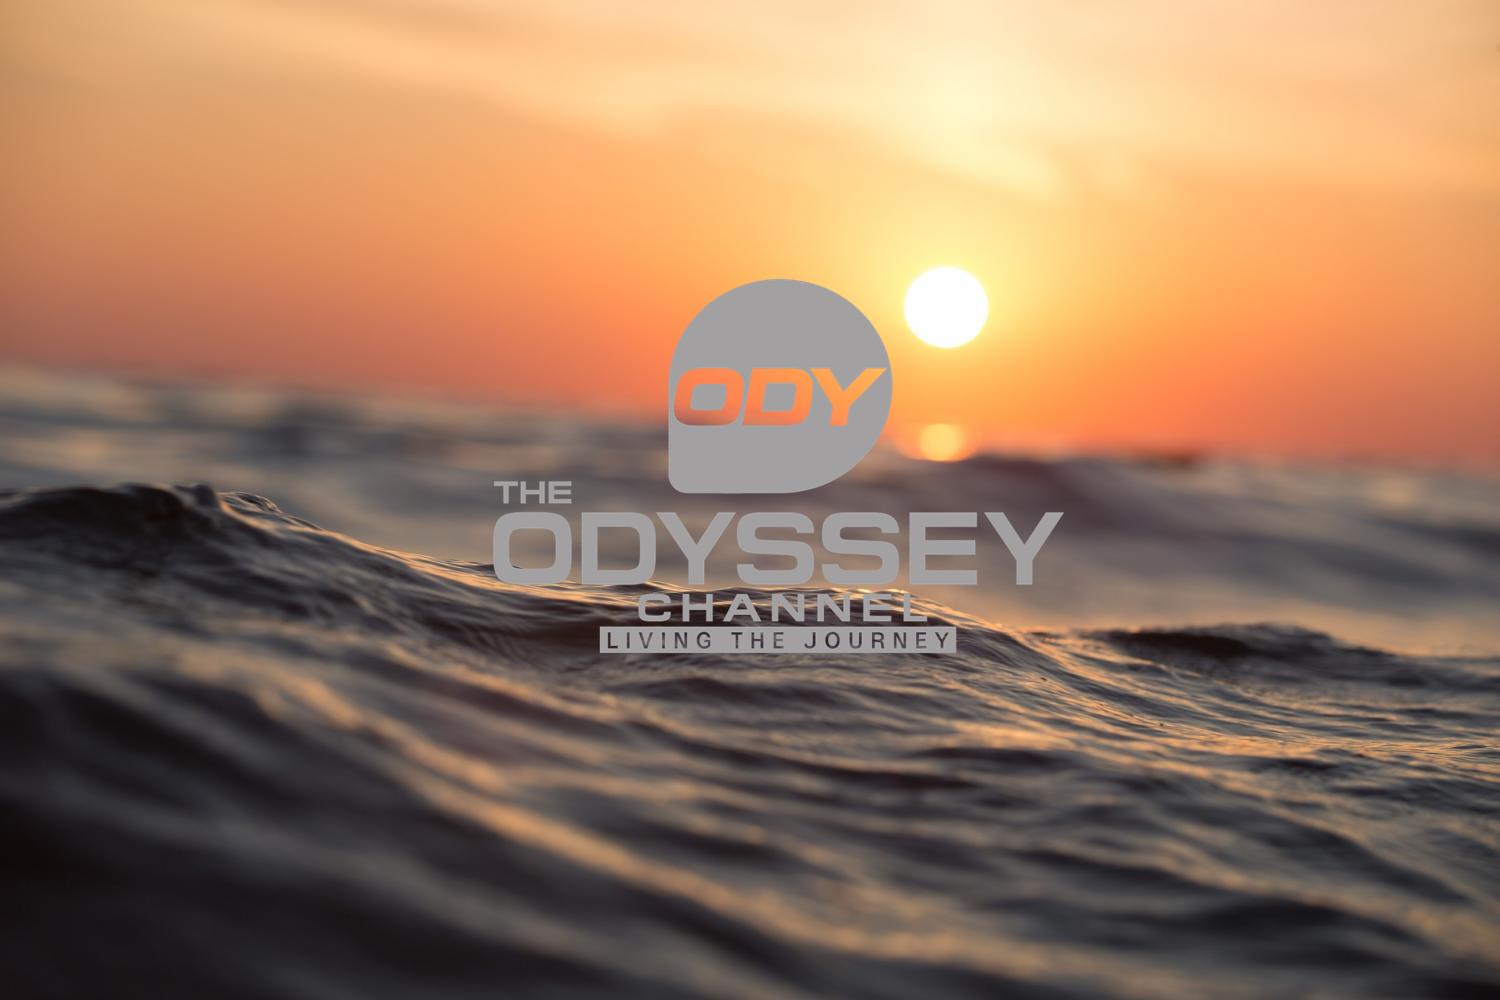 The Odyssey Channel